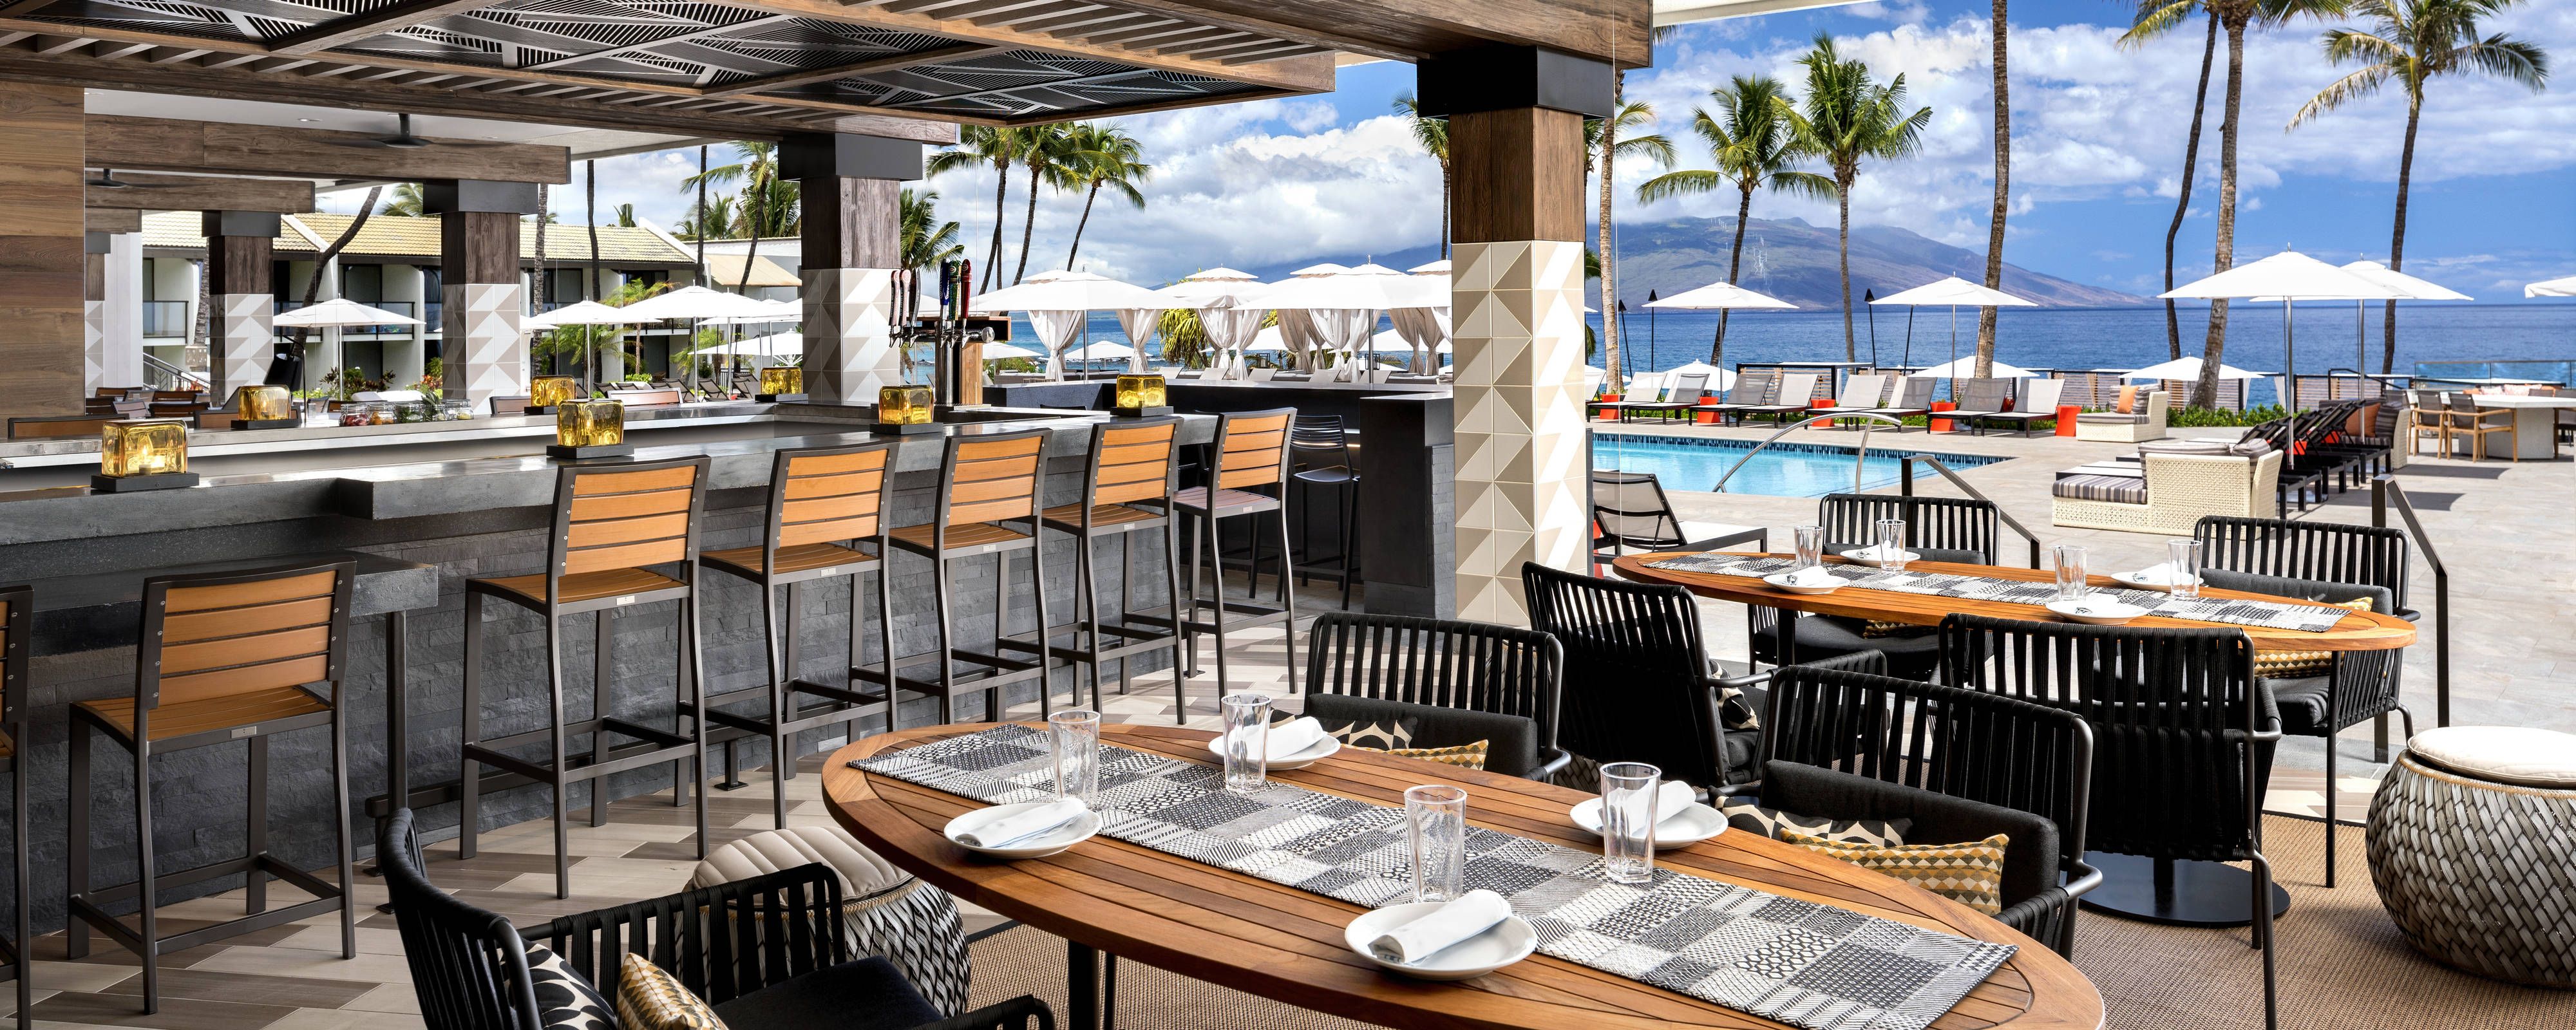 Wailea Restaurants And Luaus | Wailea Beach Resort Intended For Simple Living Maui Buffets (Gallery 19 of 20)